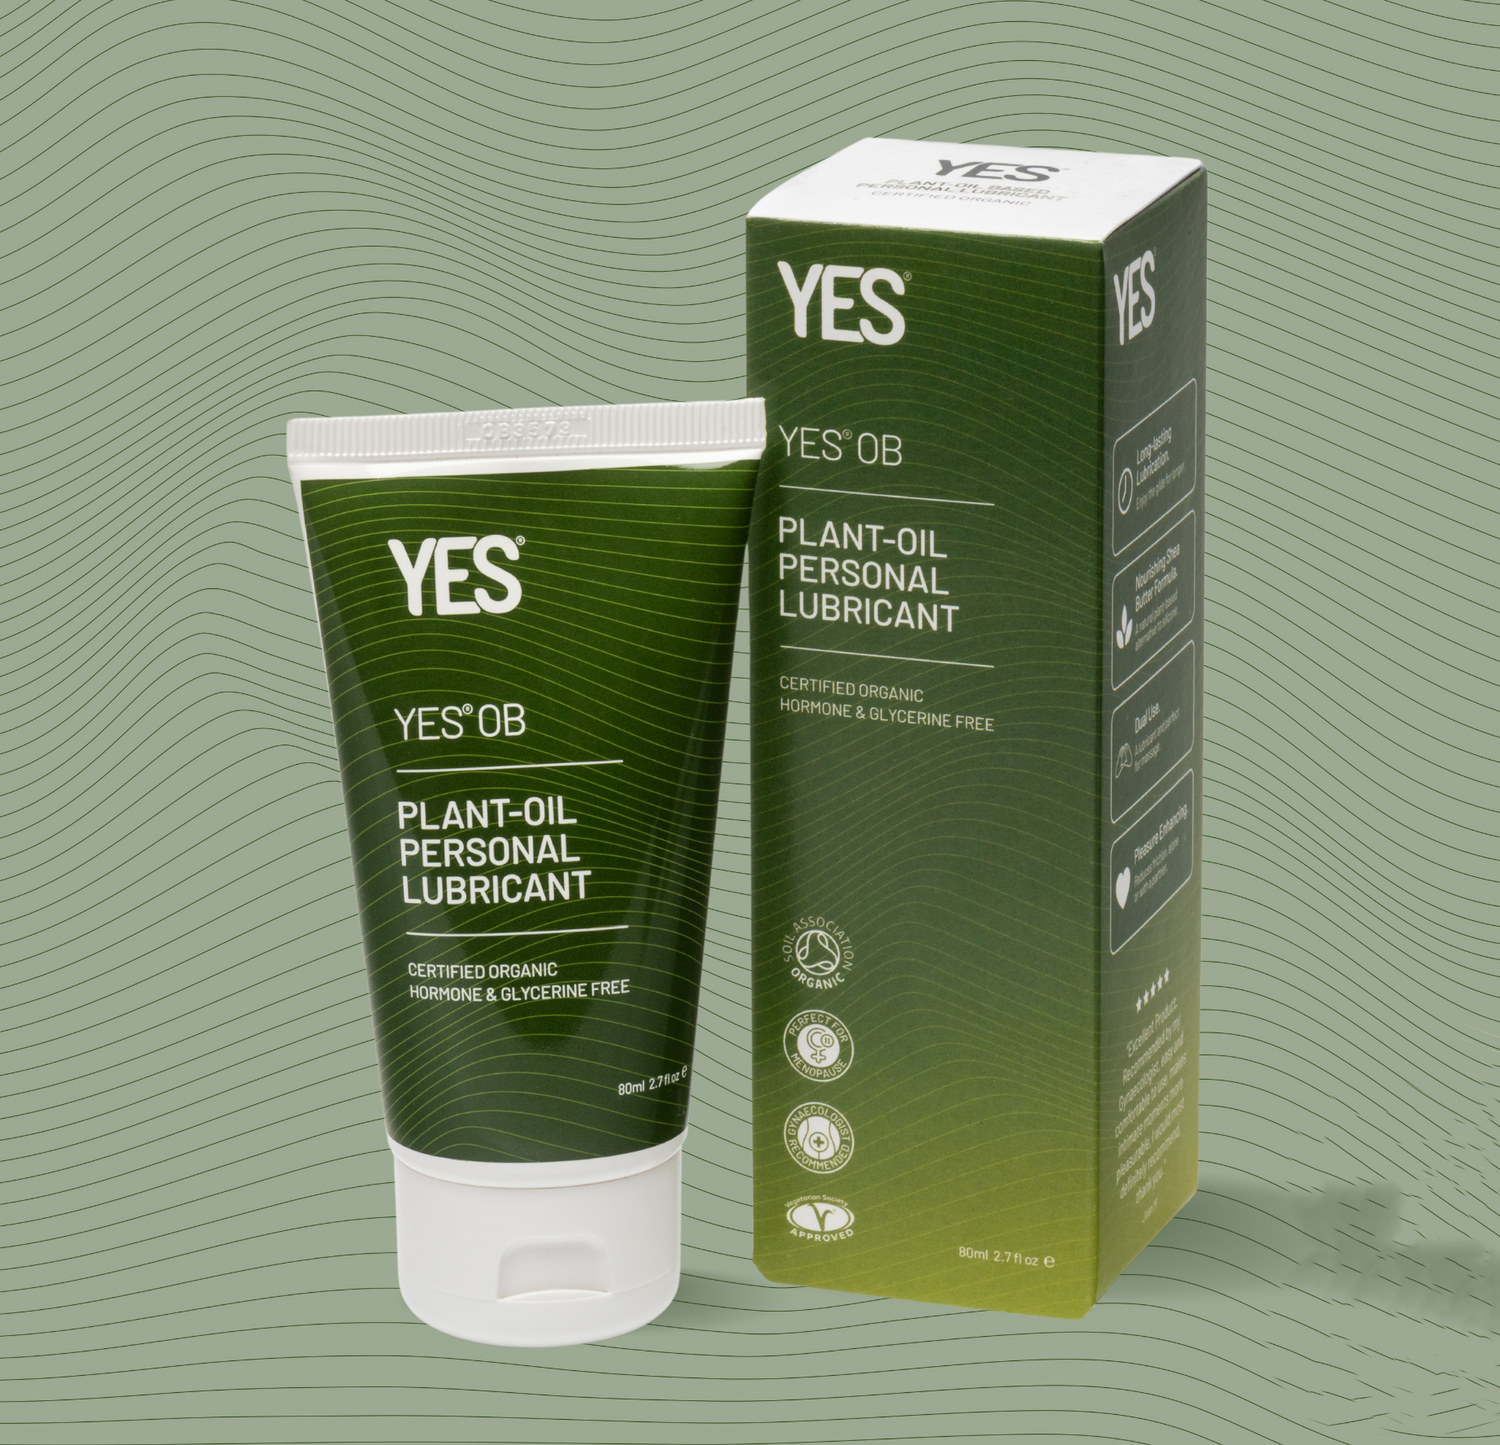 YES PLANT-OIL BASED PERSONAL LUBRICANT